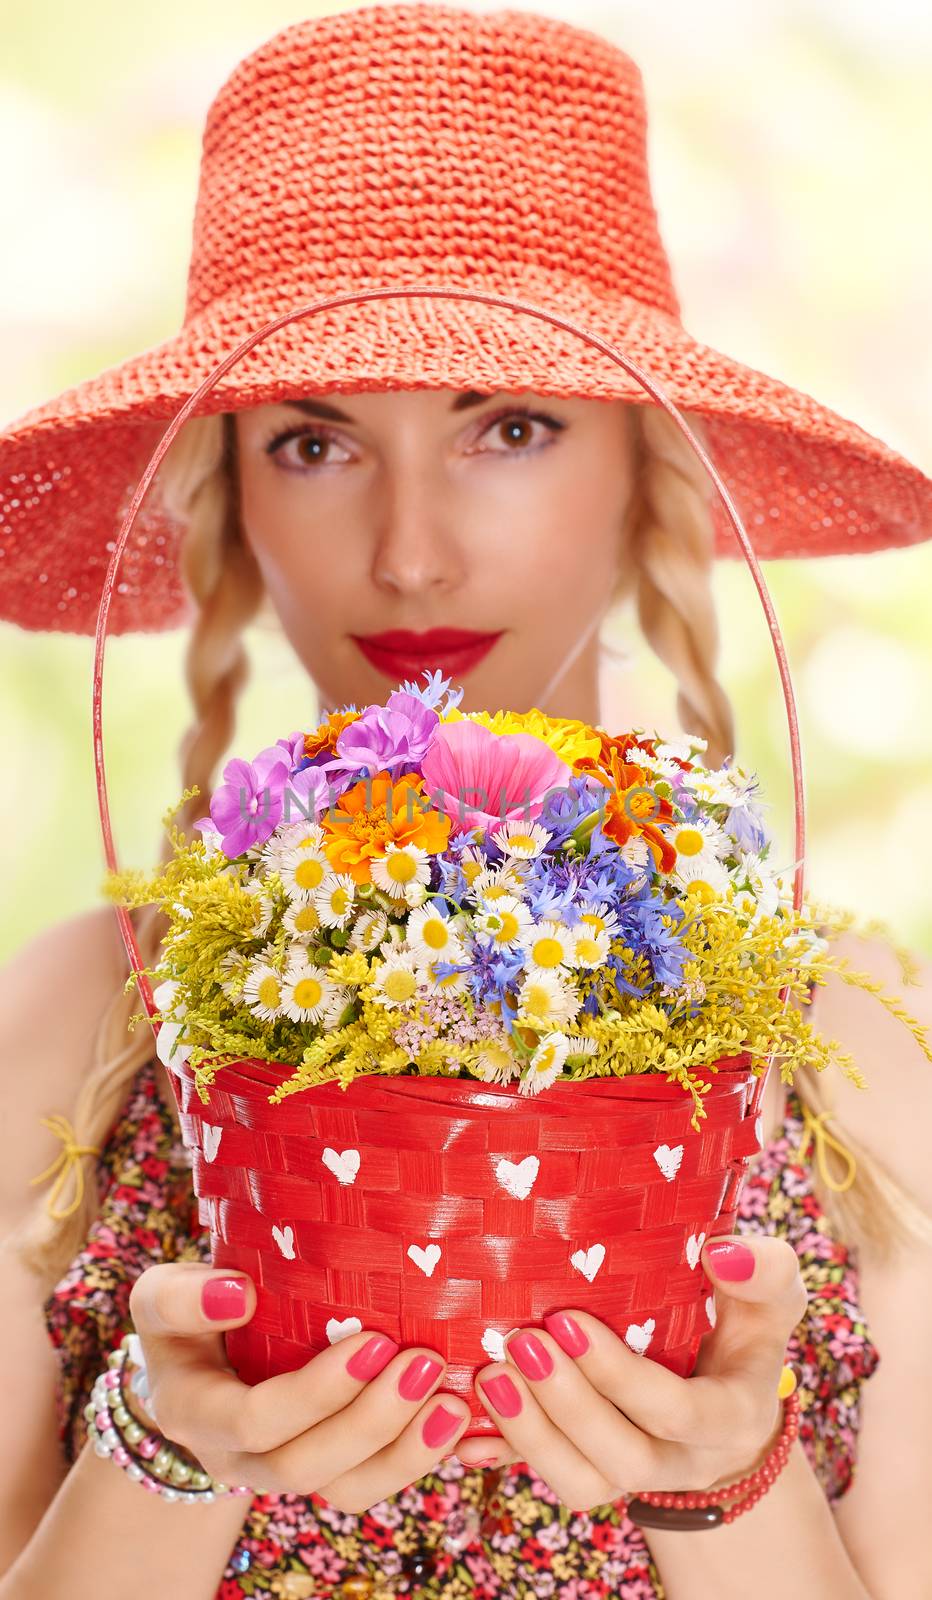 Woman on summer meadow with basket of wildflowers by 918